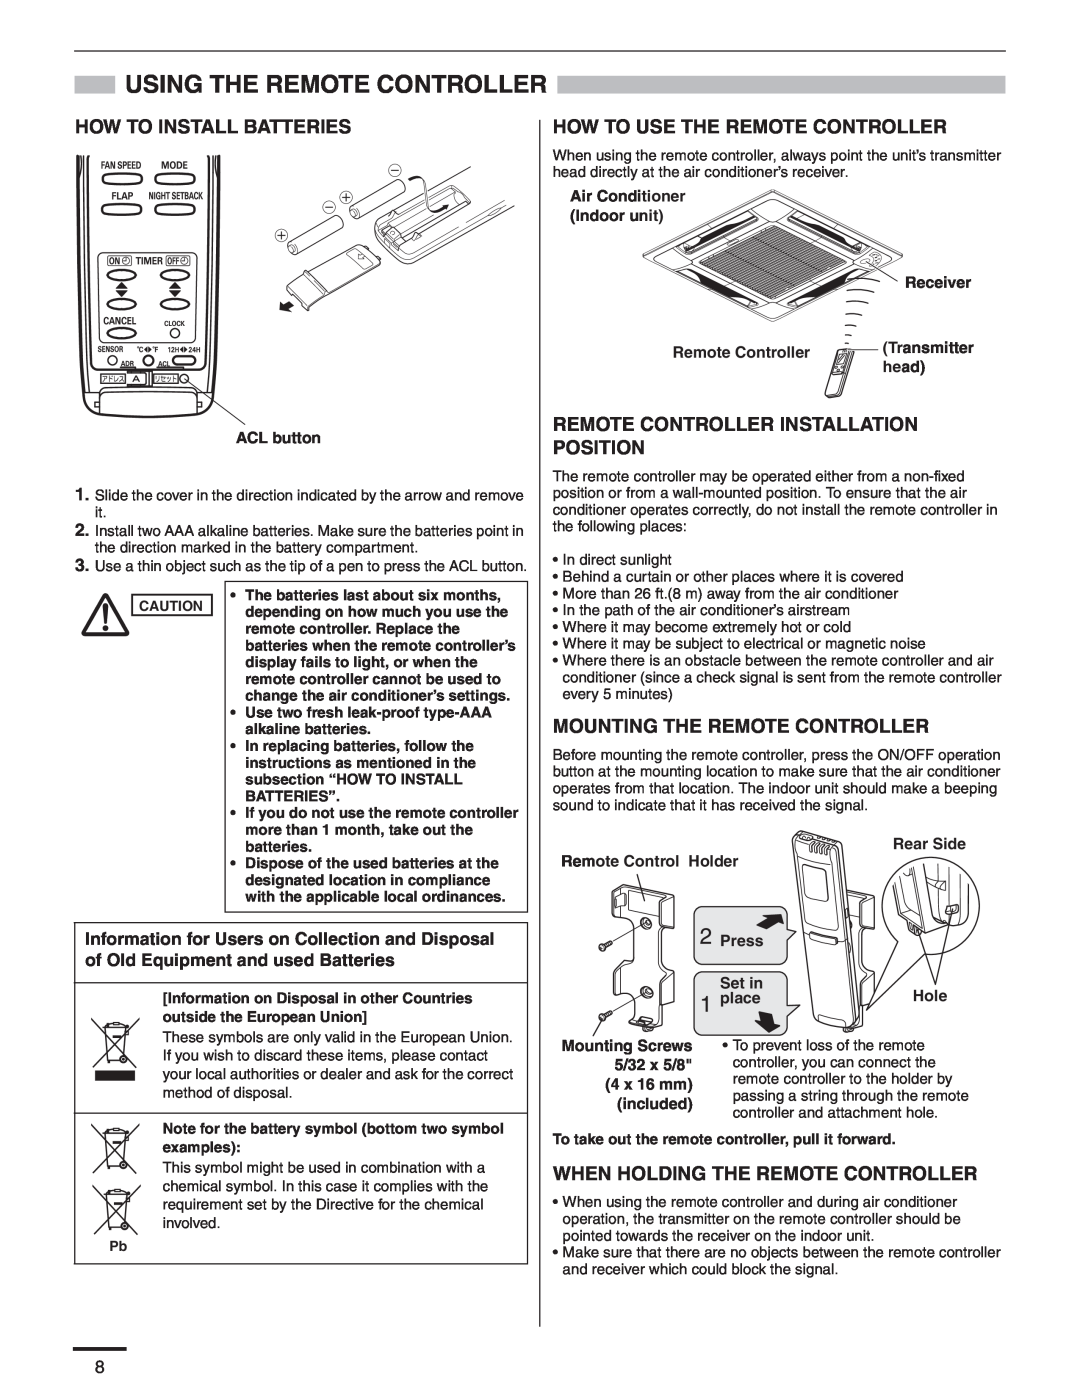 Panasonic R410A service manual Using The Remote Controller, How To Install Batteries, How To Use The Remote Controller 